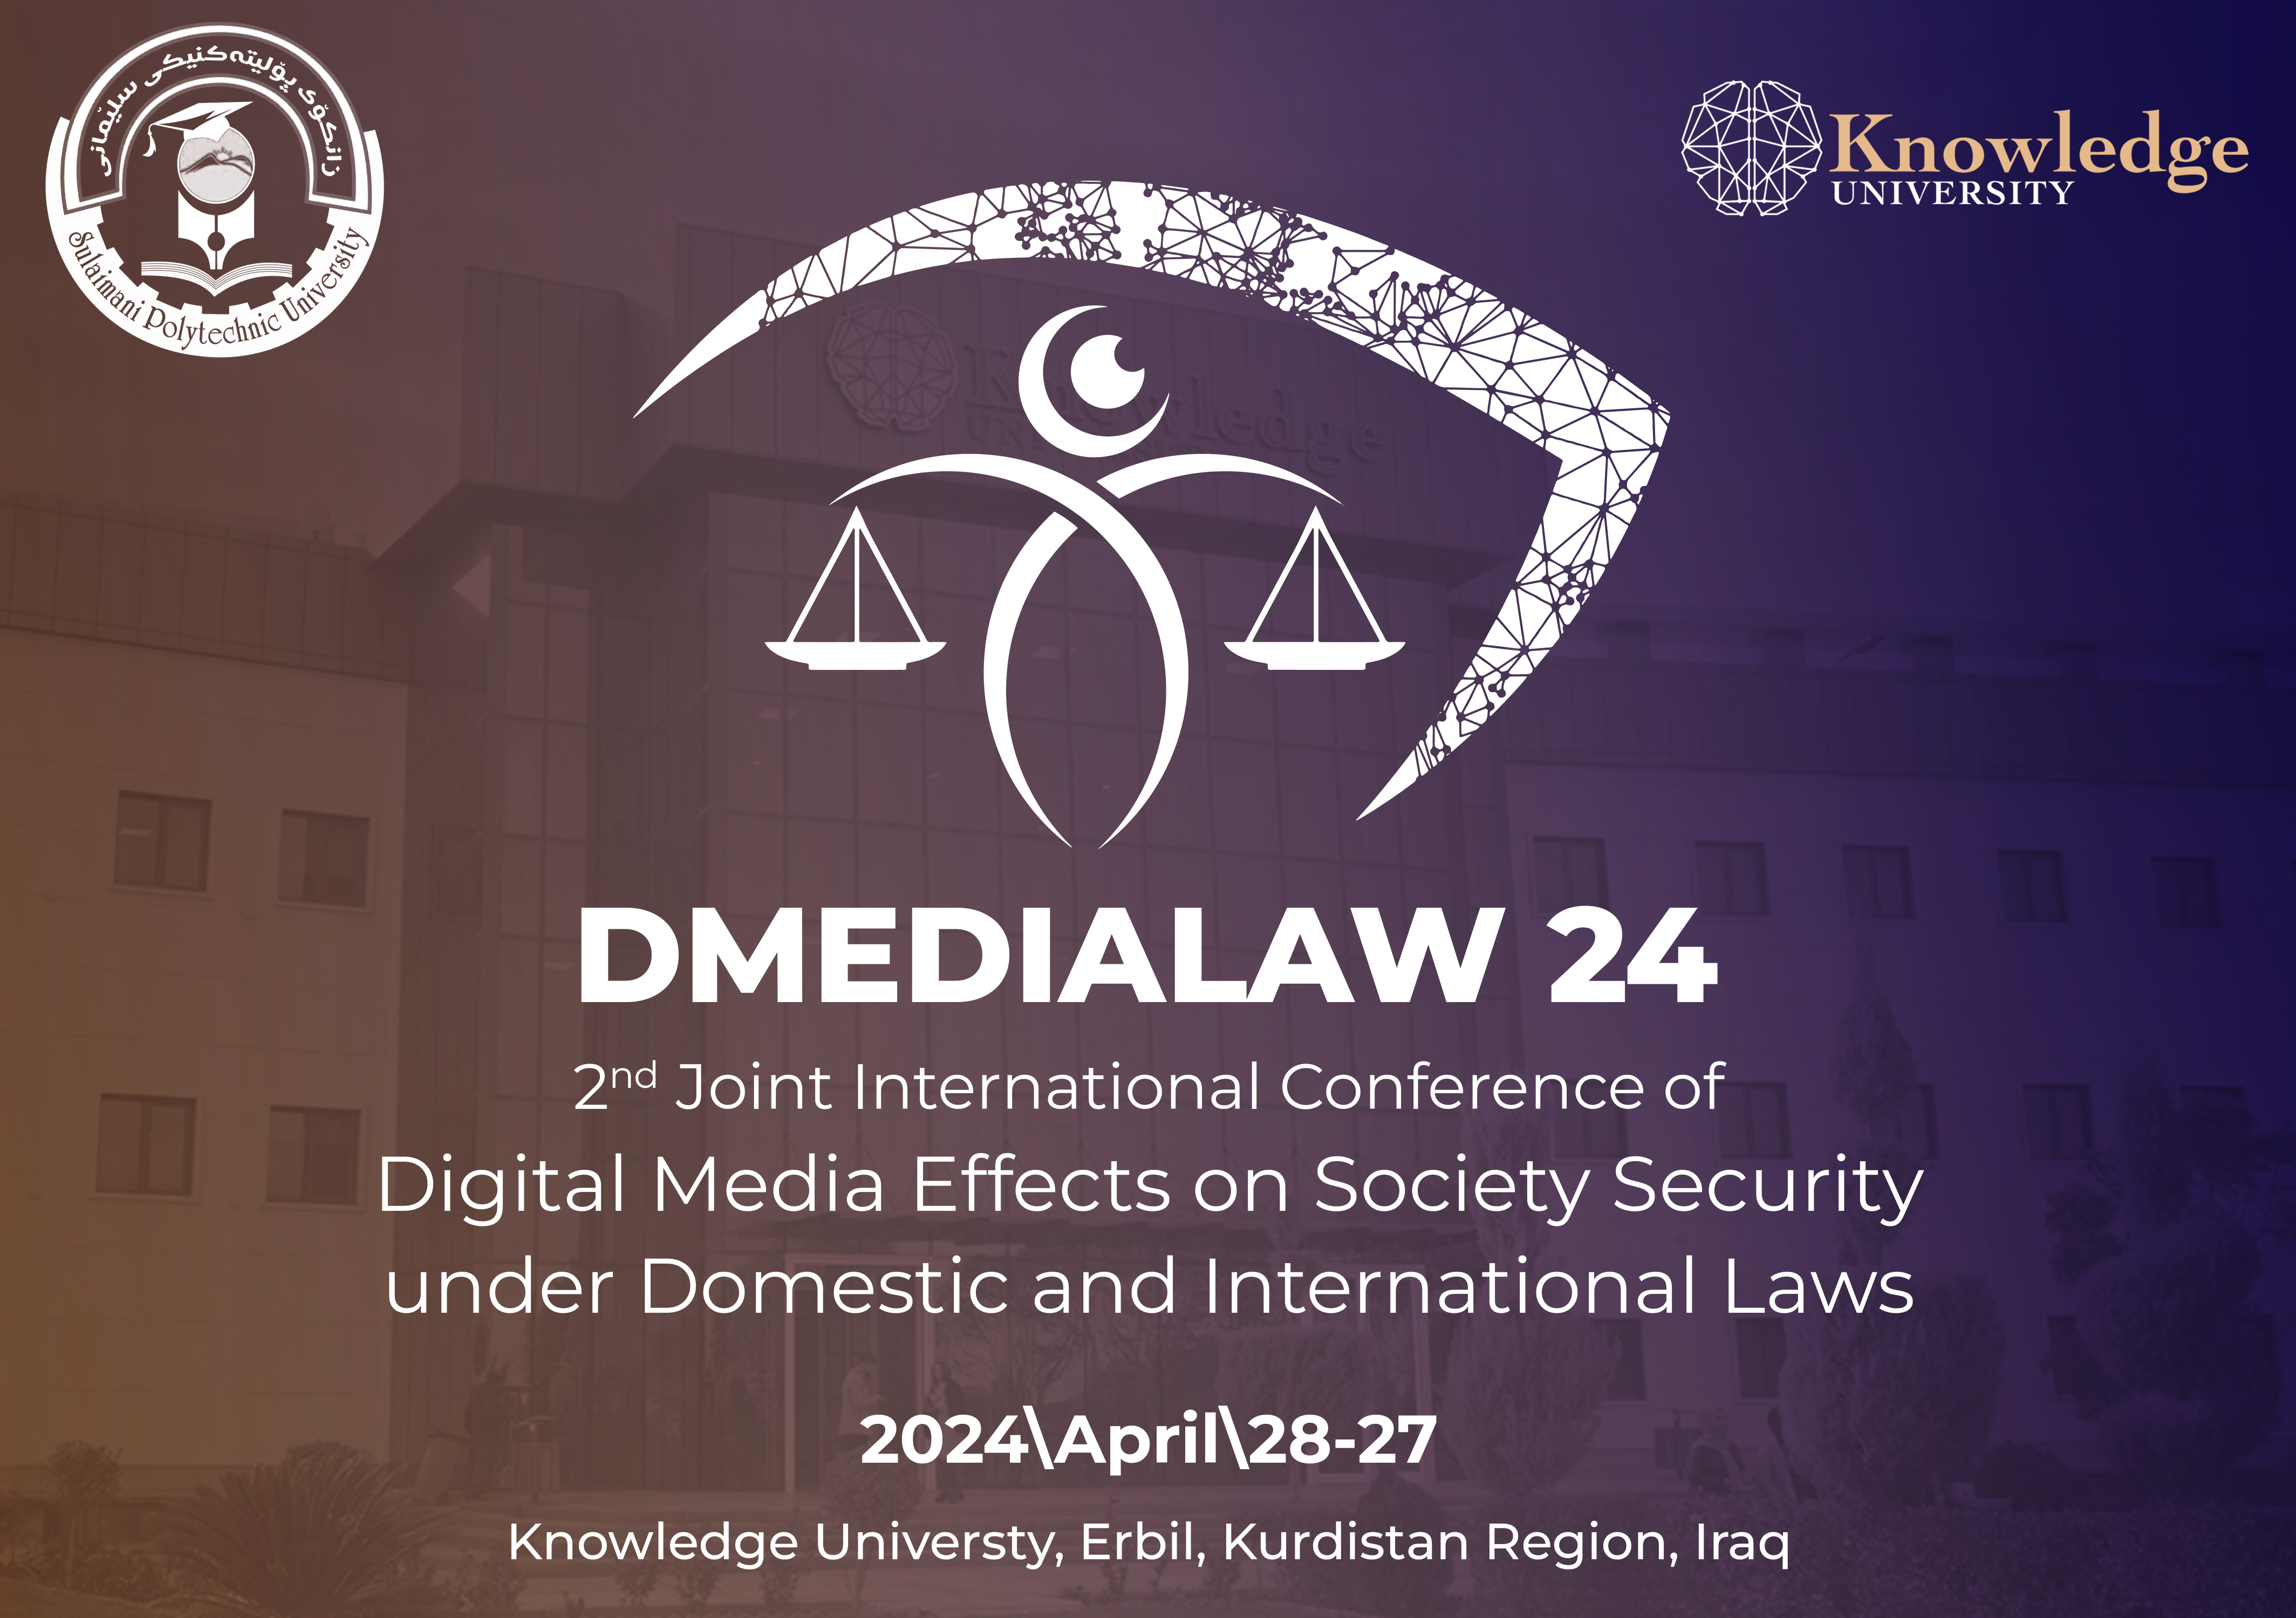 DMEDIALAW24: Second Joint International Scientific Conference on Digital Media Effects on Society Security under Domestic and International Laws